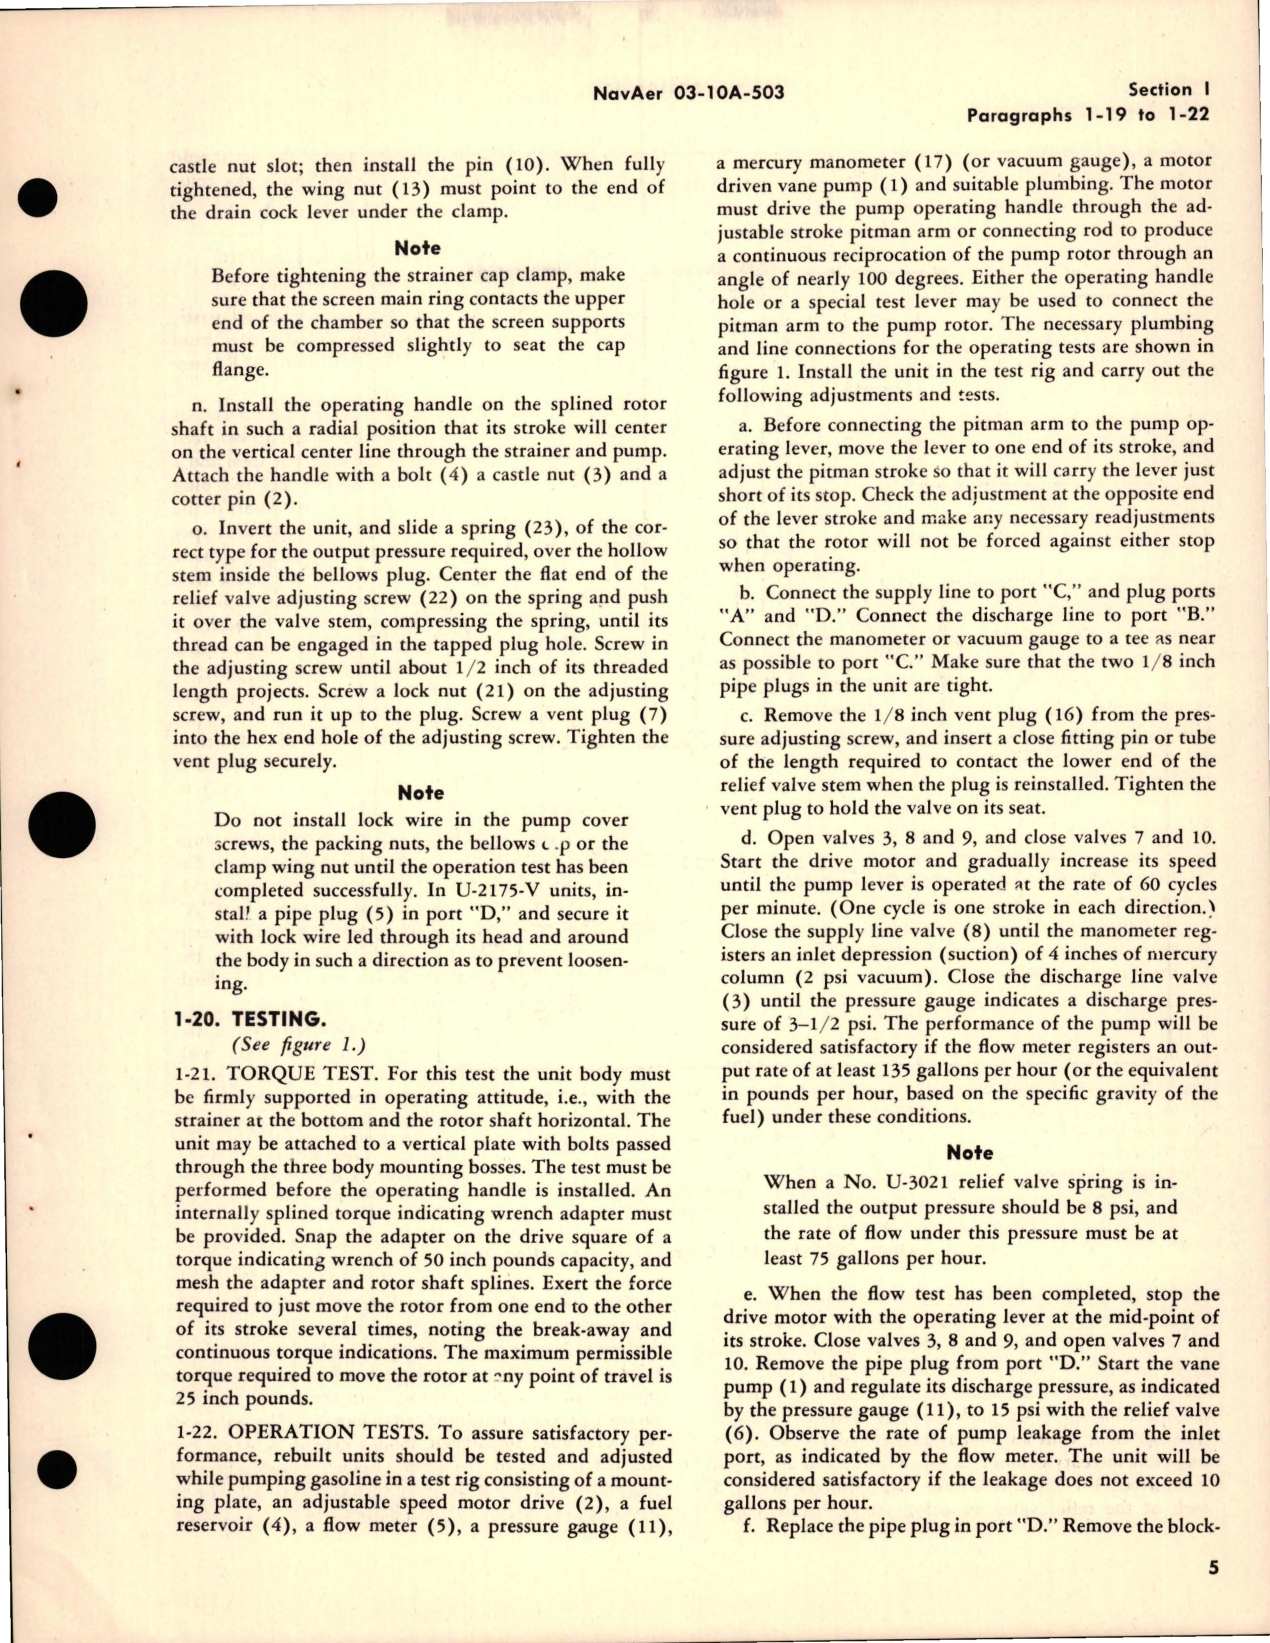 Sample page 7 from AirCorps Library document: Overhaul Instructions with Parts Catalog for Fuel Units 